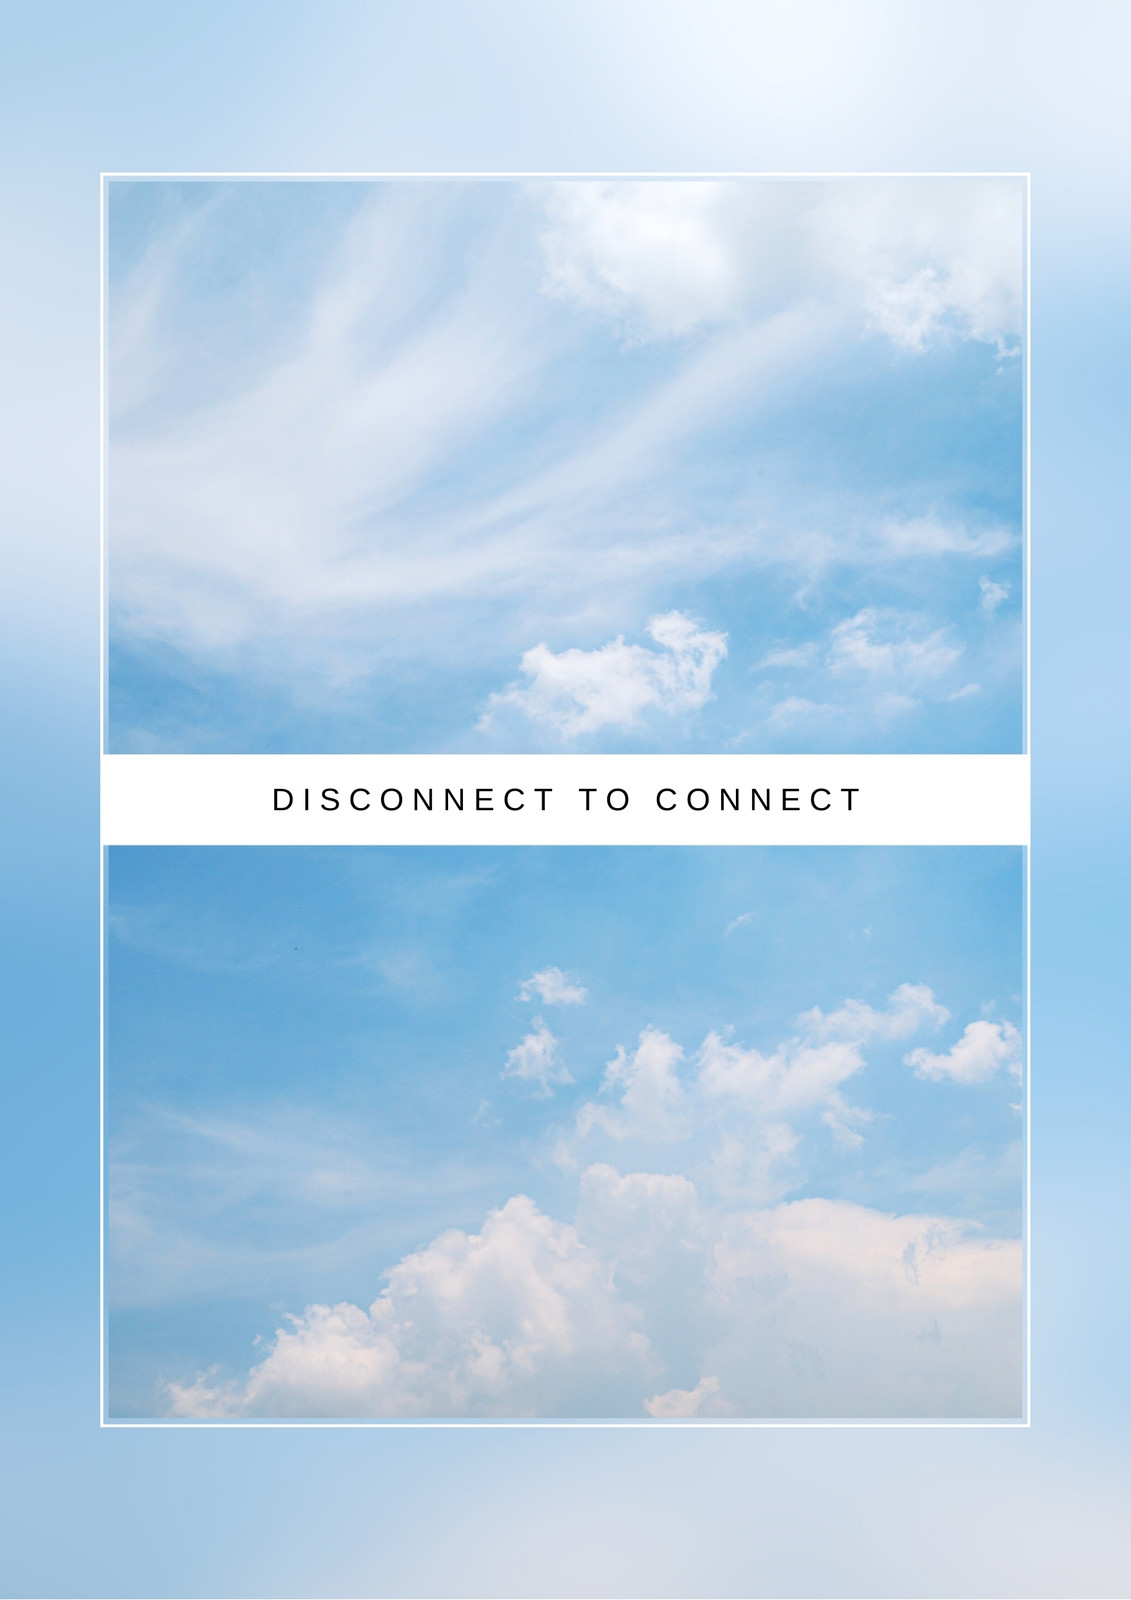 Twitch Dreamy Blue Magical Cloudy Sky Aesthetic (Instant Download